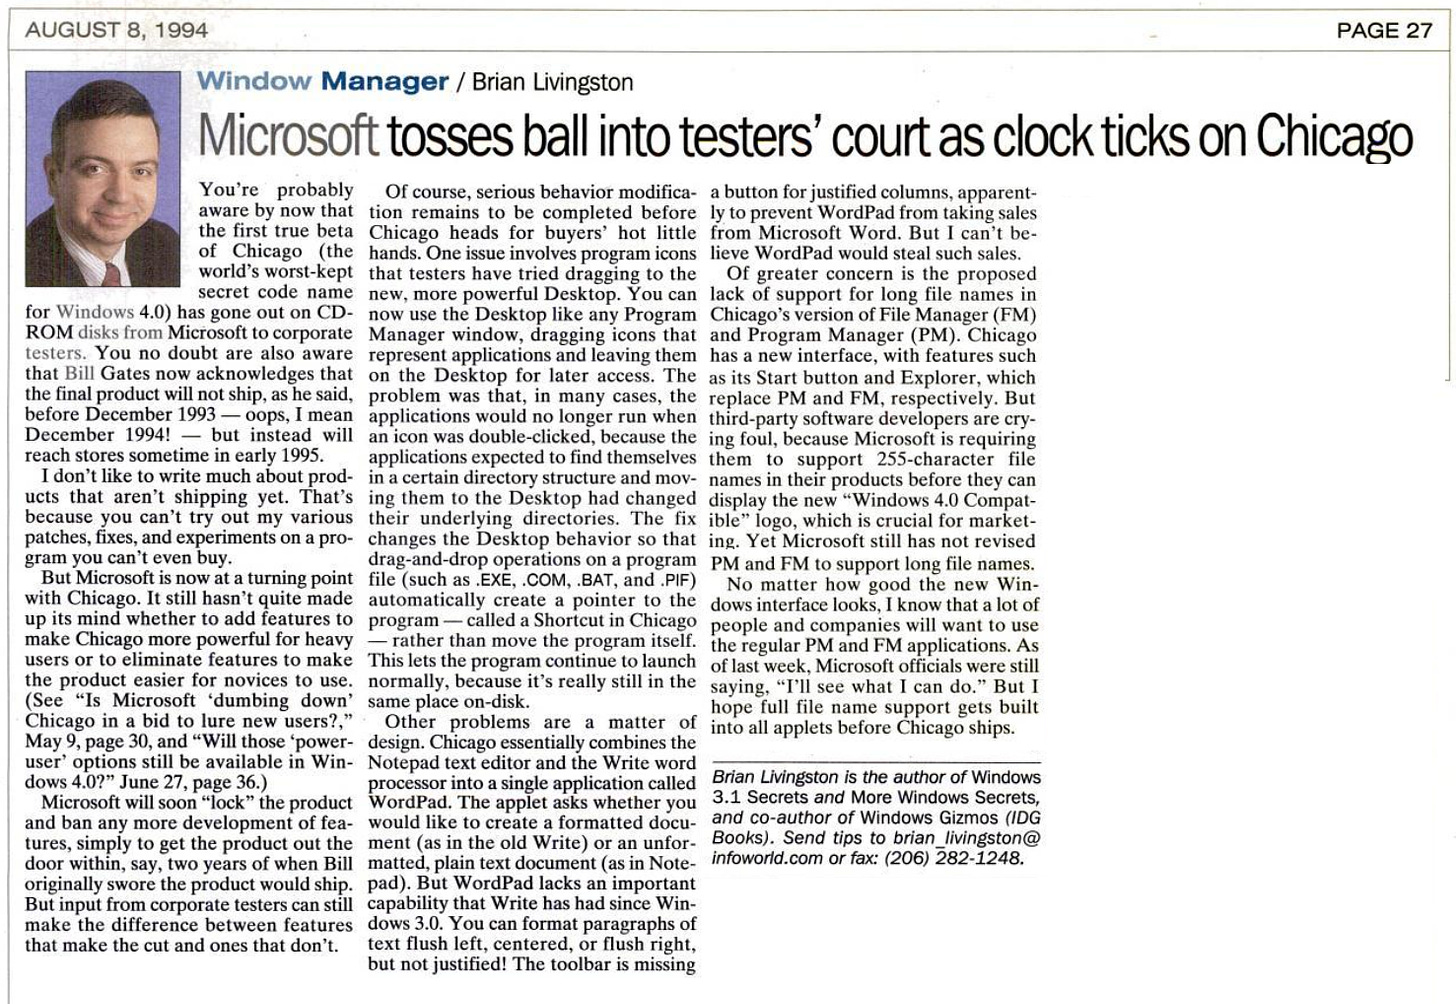 Headling: Microsoft tosses ball into testers' court as clock ticks on Chicago